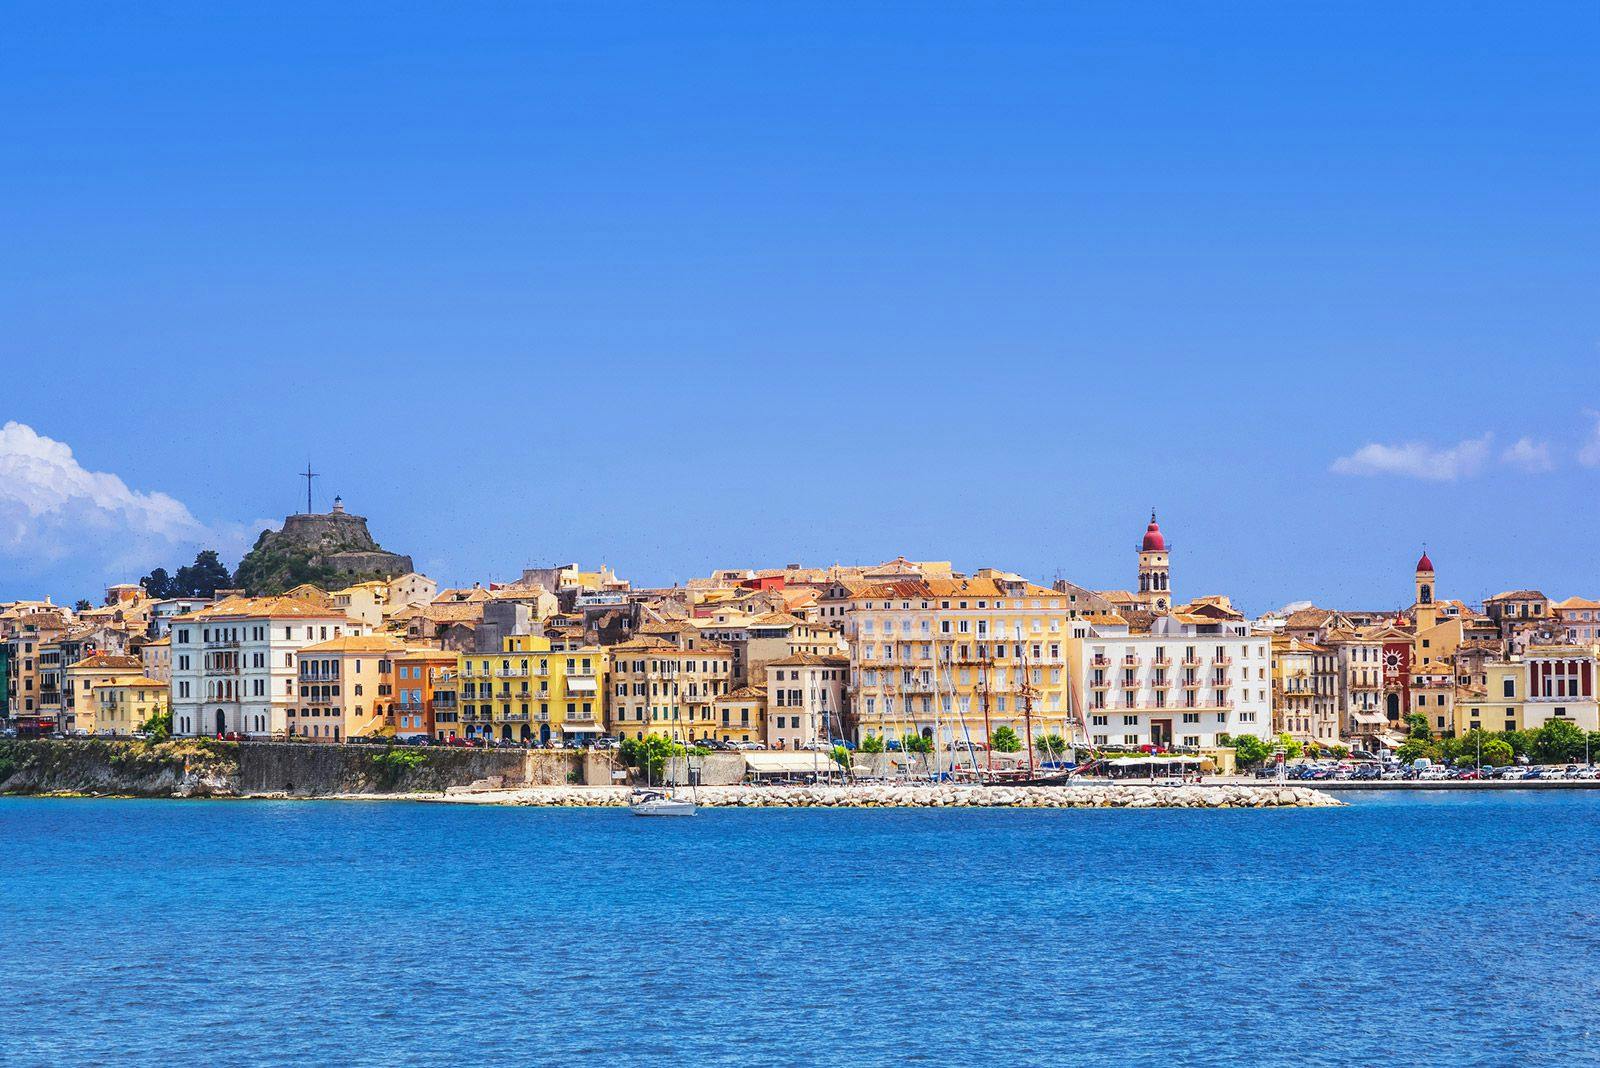 A view of Corfu Old Town from the sea